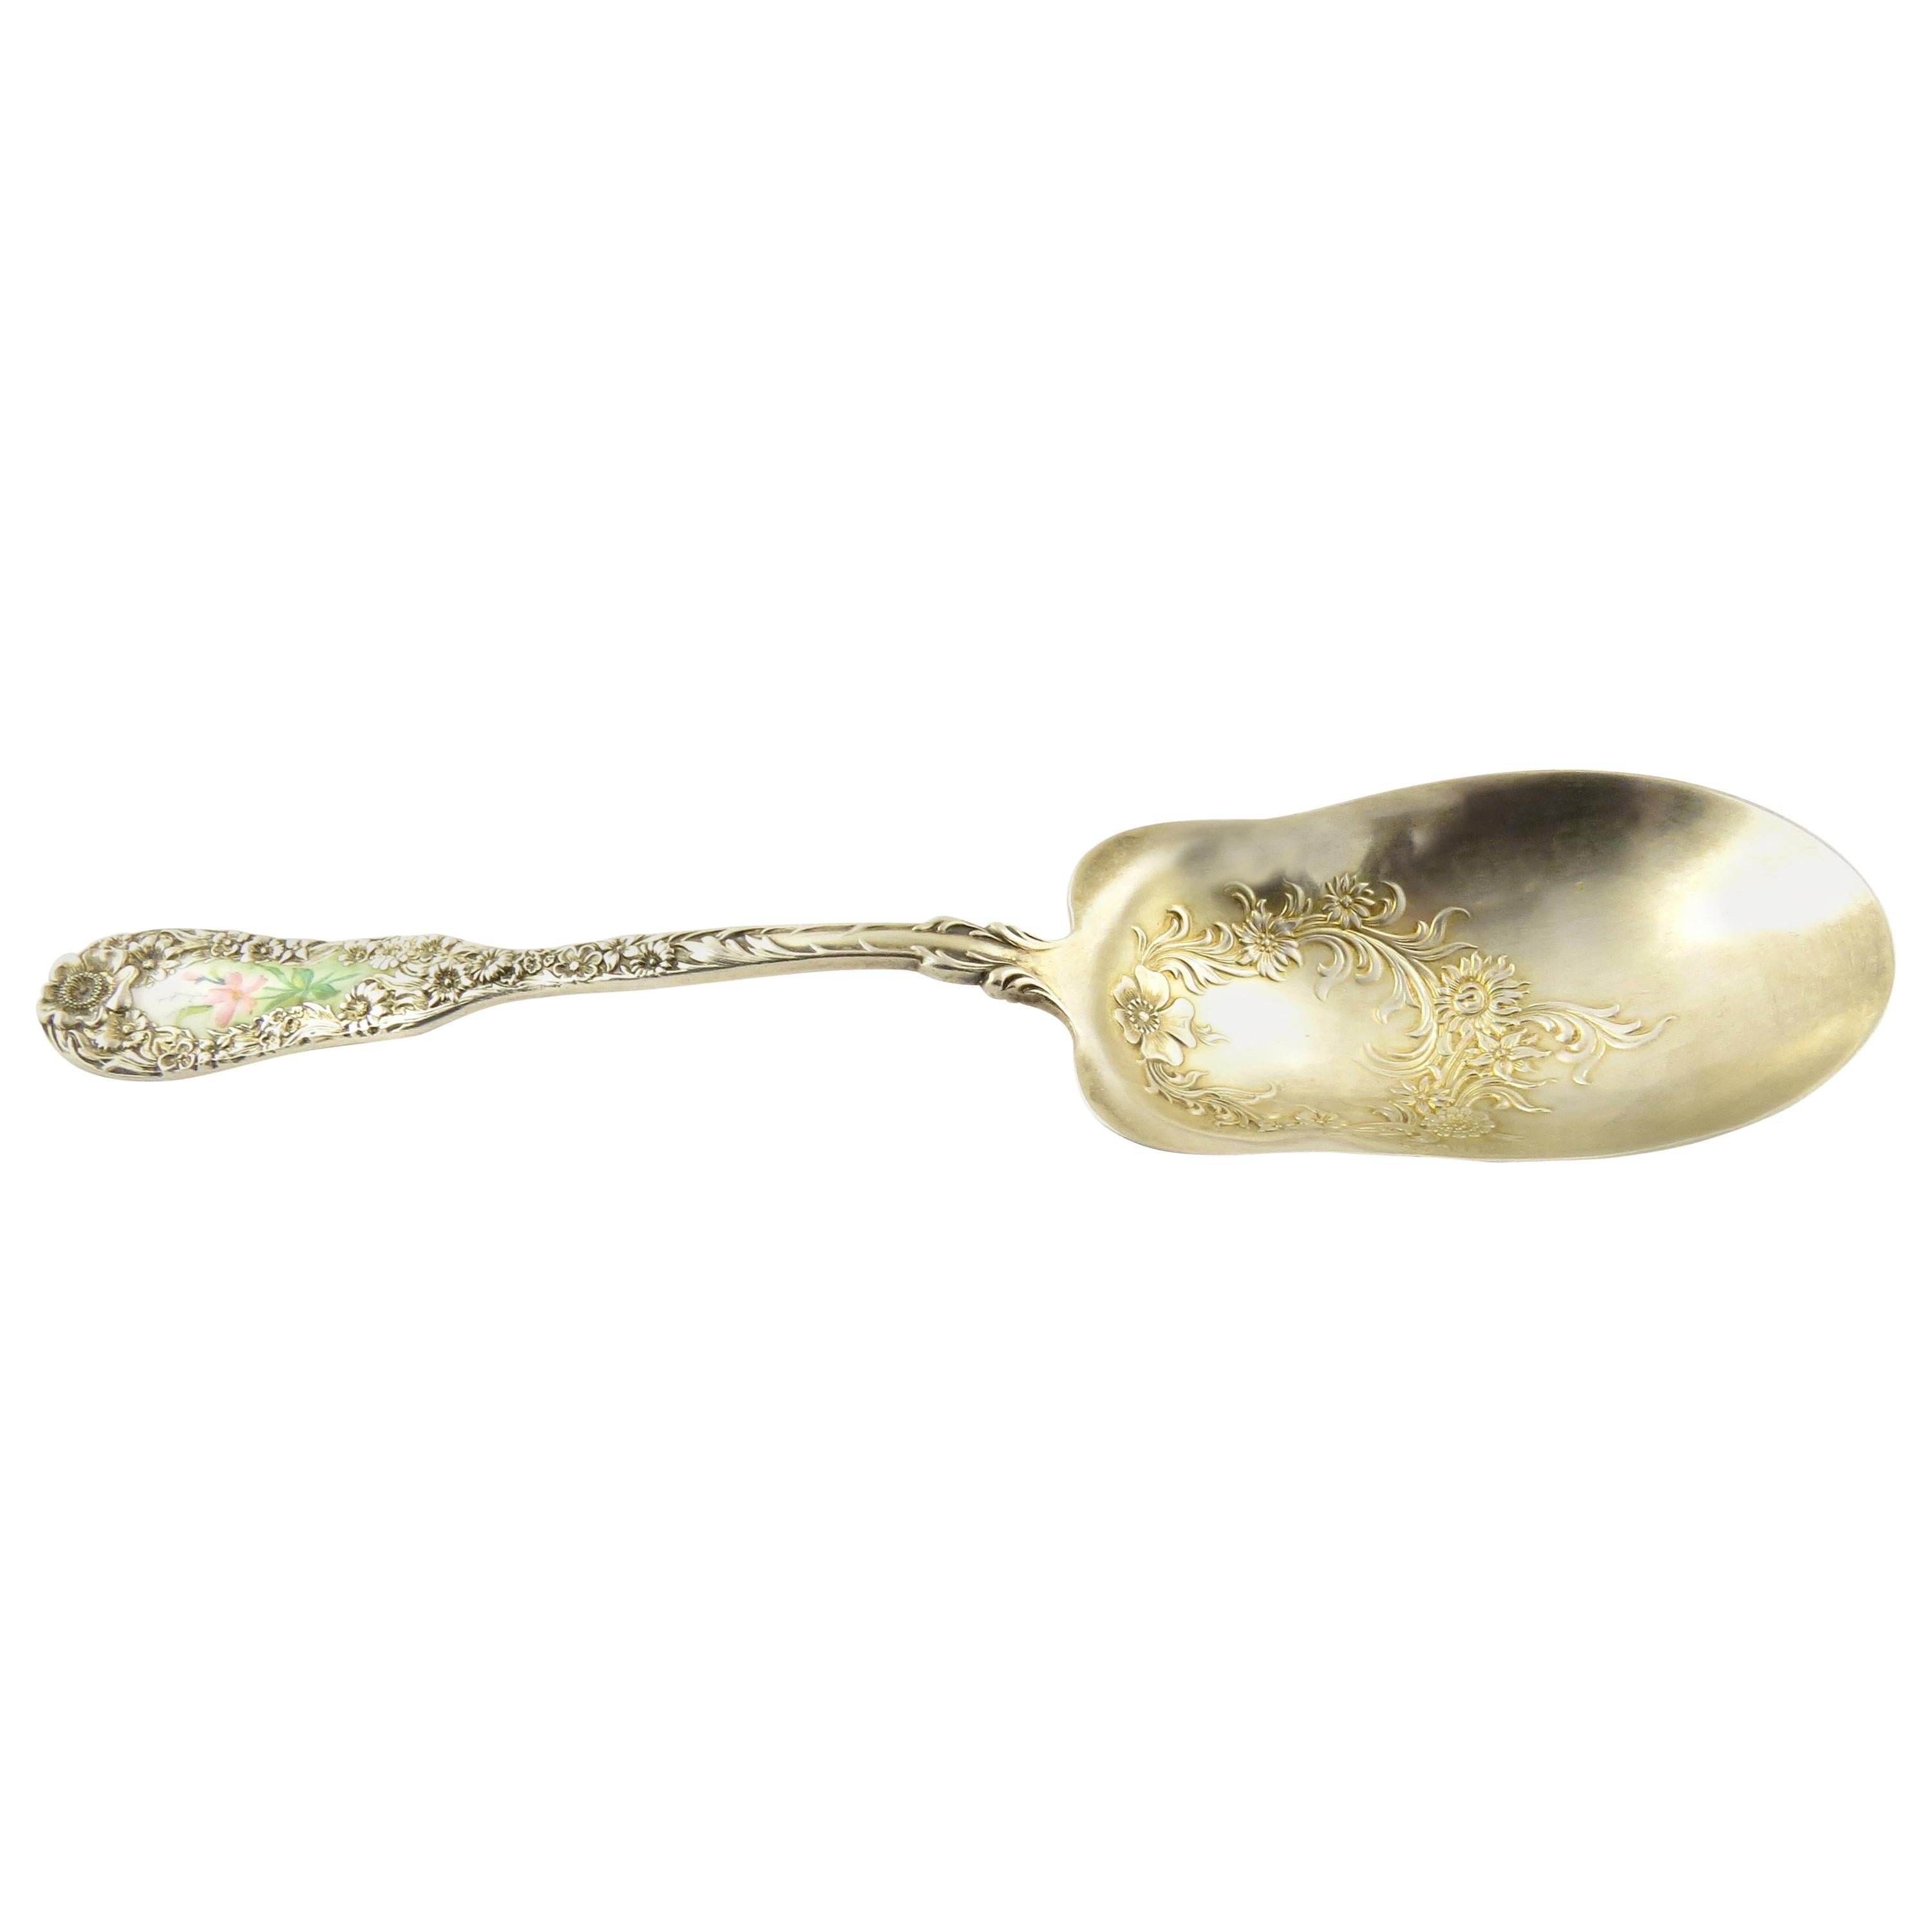 Dominick & Haff No.10 Sterling Silver Enameled Gilt Small Berry Spoon